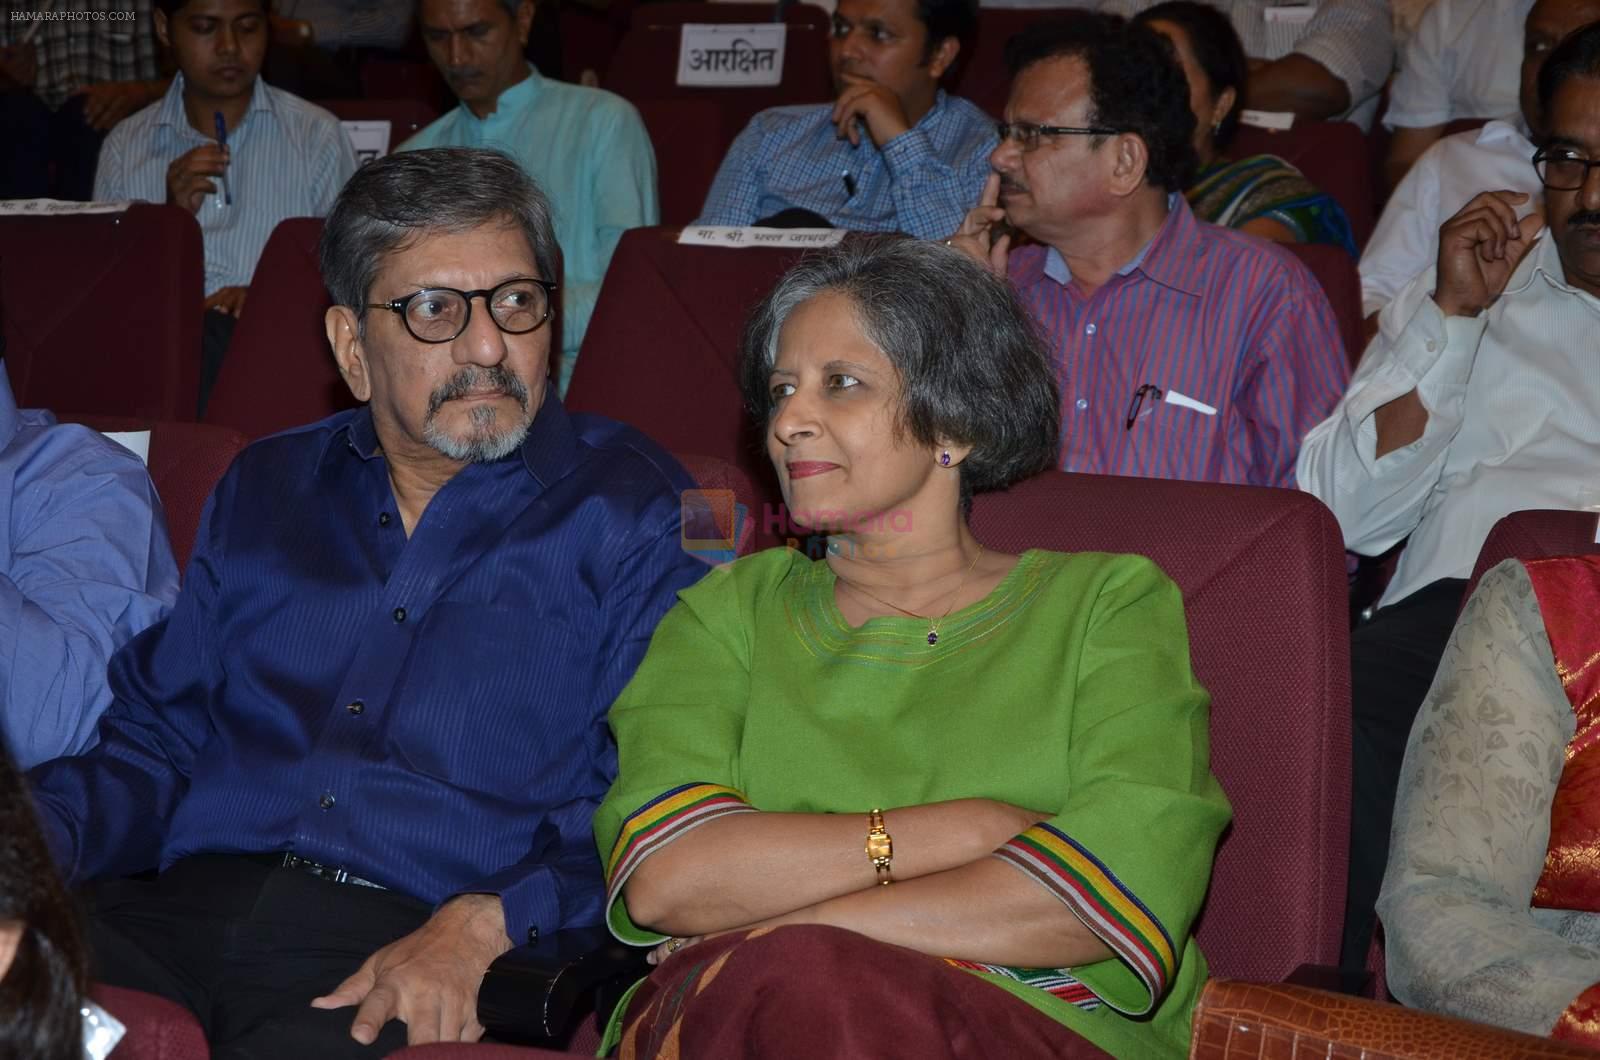 Amol Palekar at a book reading at Marathi event on 16th June 2015